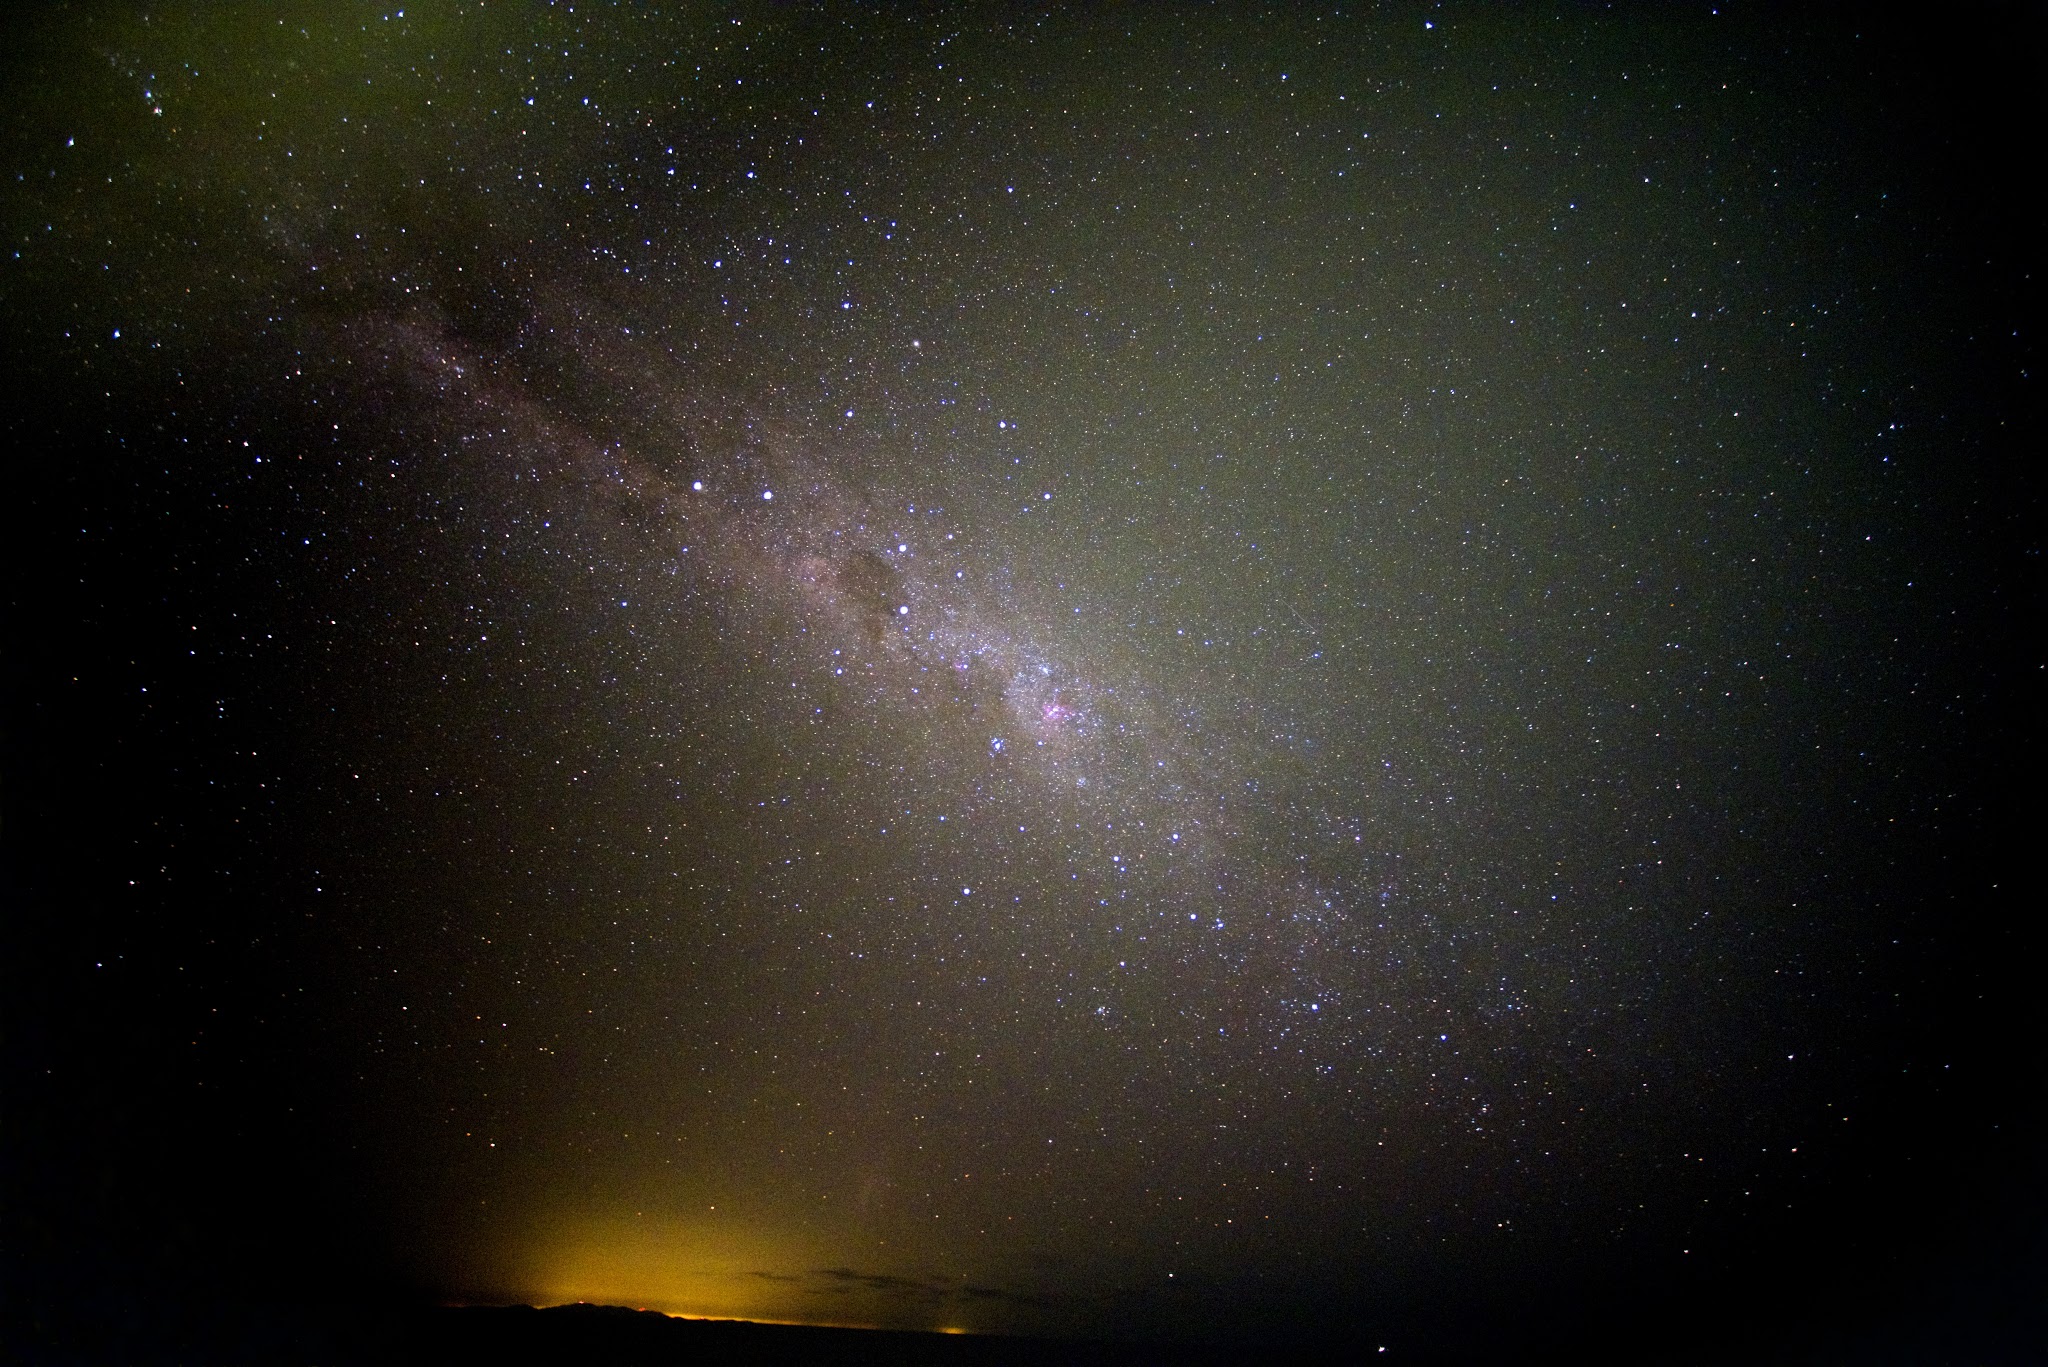 Southern Cross at Sea: Astrophotographer Shoots Stunning Image While on Ship